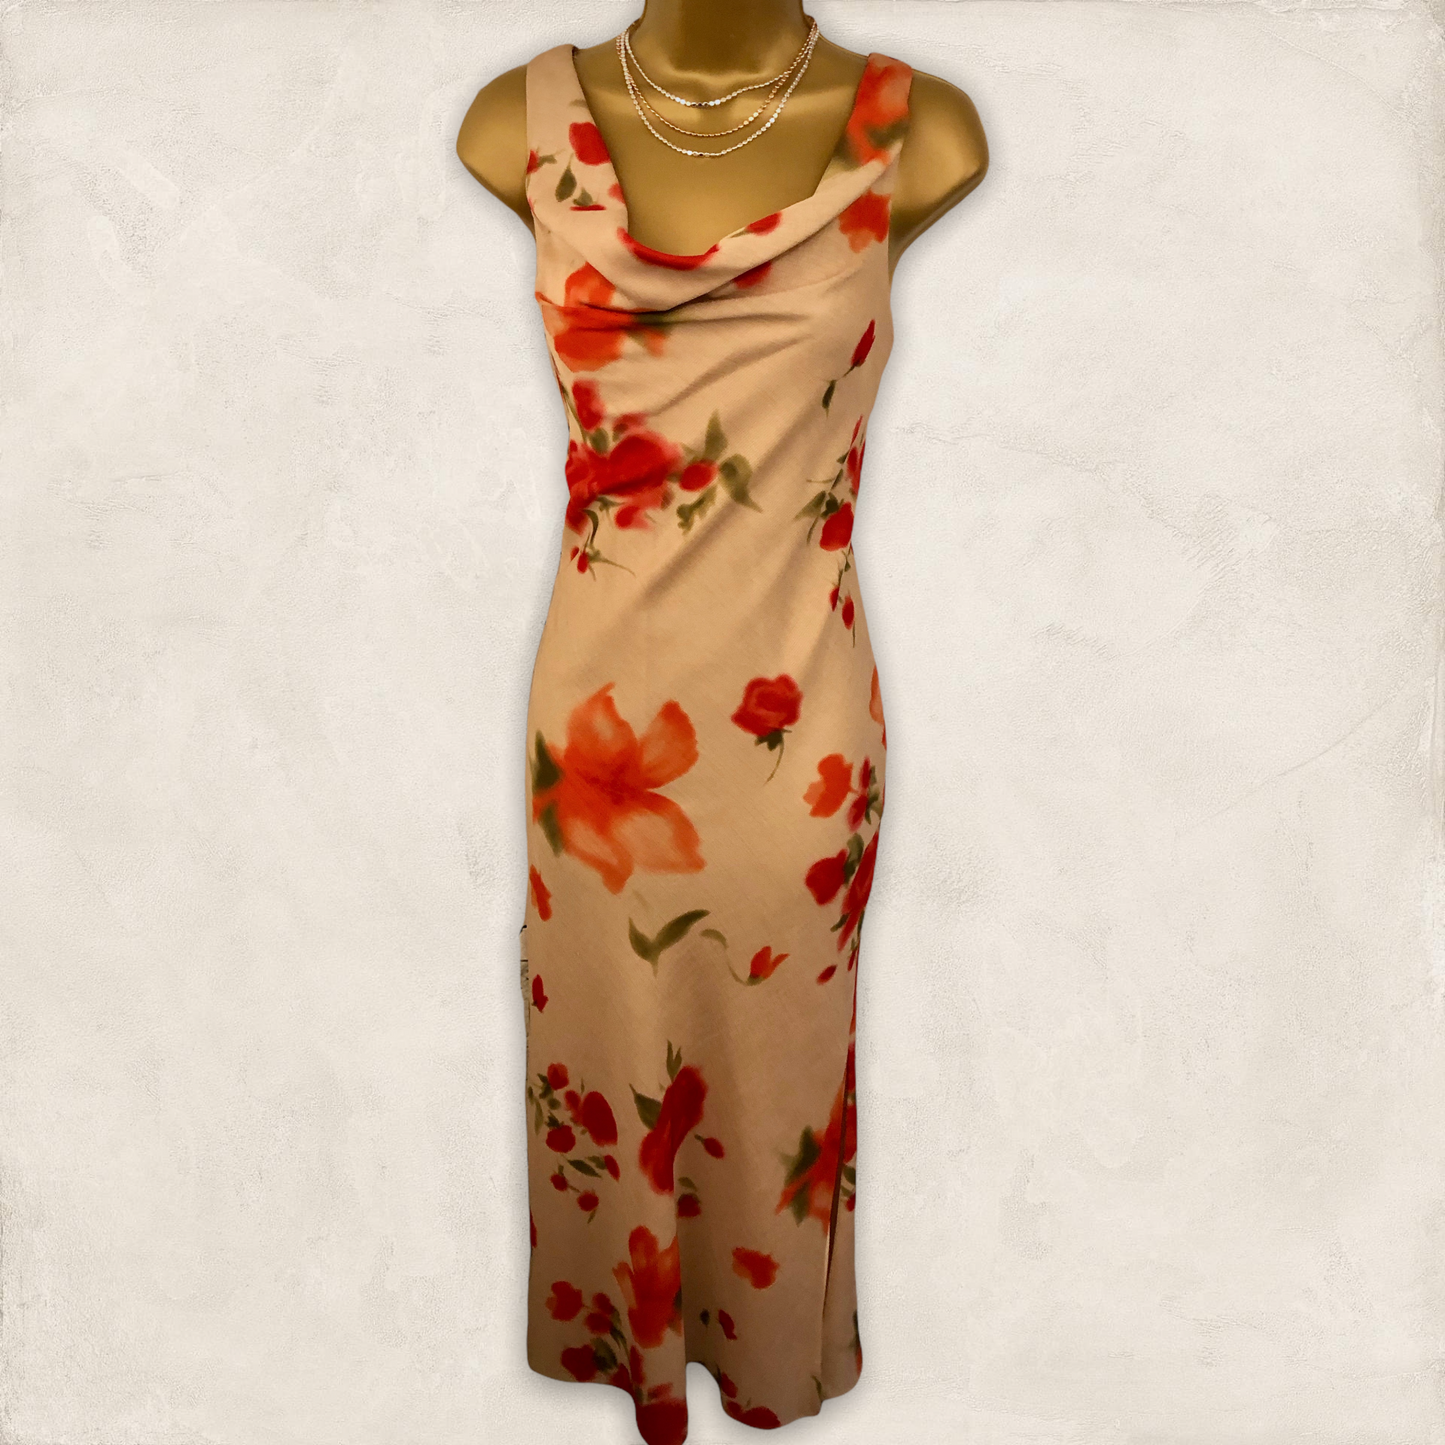 Chrystiano Beige & Red Floral Special Occasion Outfit UK 12 US 8 EU 40 BNWT RRP £295 Timeless Fashions